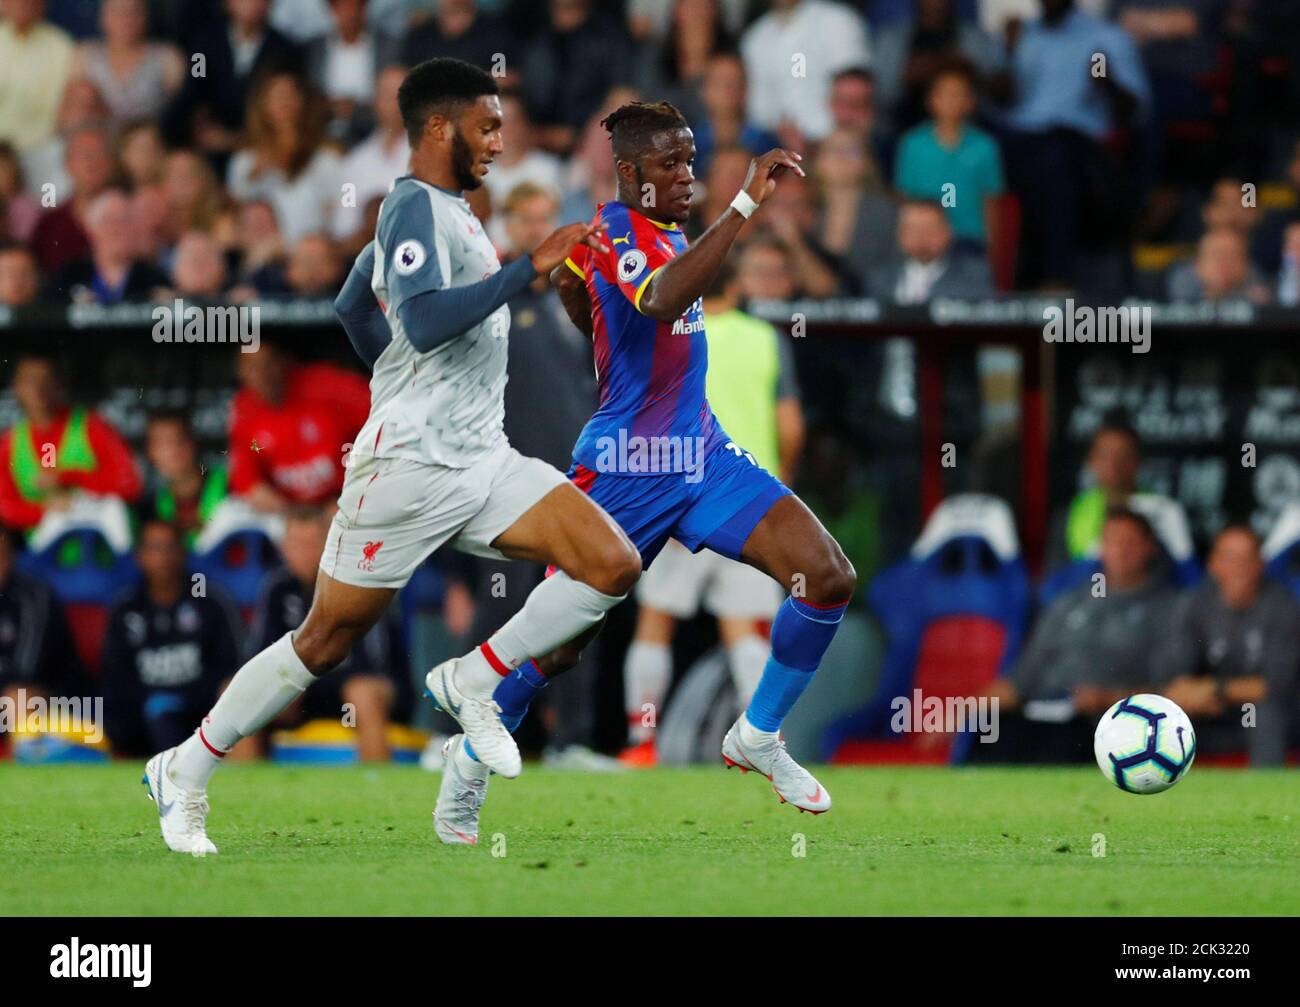 Soccer Football - Premier League - Crystal Palace v Liverpool - Selhurst Park, London, Britain - August 20, 2018  Crystal Palace's Wilfried Zaha in action with Liverpool's Joe Gomez               REUTERS/Eddie Keogh  EDITORIAL USE ONLY. No use with unauthorized audio, video, data, fixture lists, club/league logos or 'live' services. Online in-match use limited to 75 images, no video emulation. No use in betting, games or single club/league/player publications.  Please contact your account representative for further details. Stock Photo